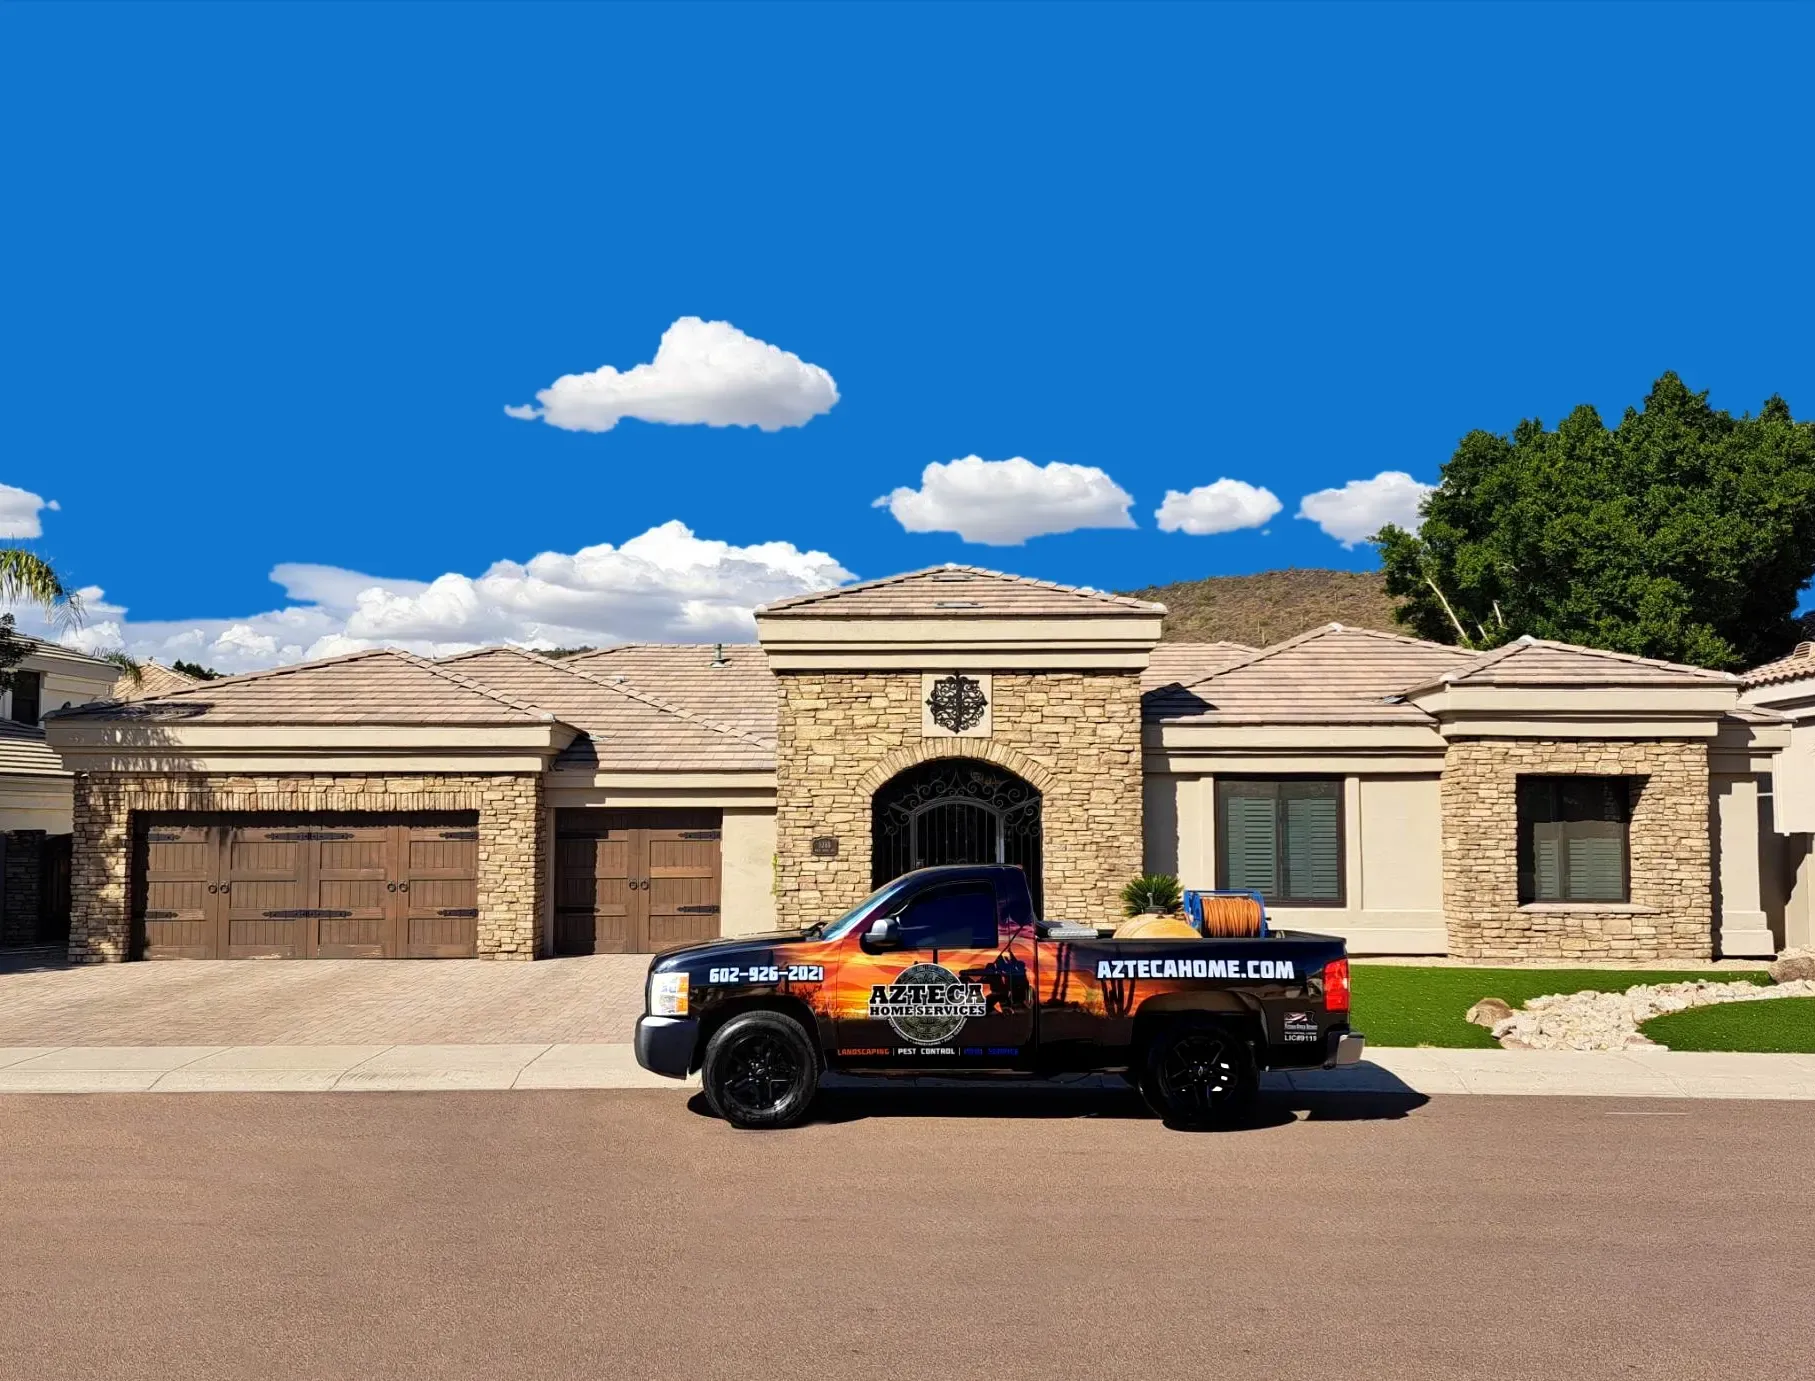 AZTECA Pest Control truck in front of house